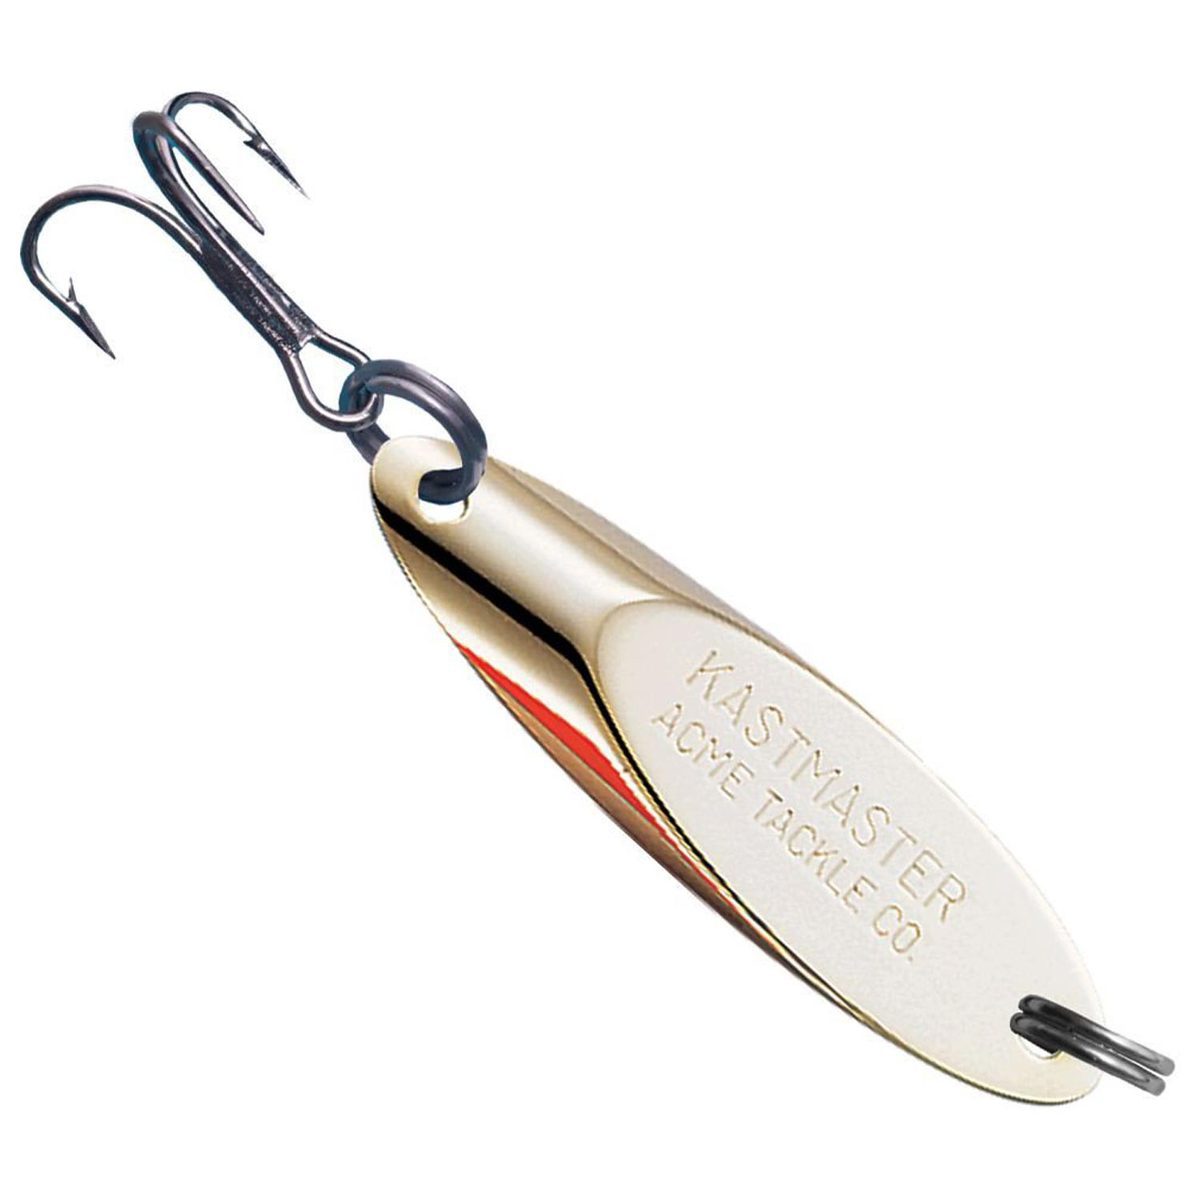 Acme Kastmaster's unique design allows for long casts and fast retrieves, making it an effective lure for covering large water area.